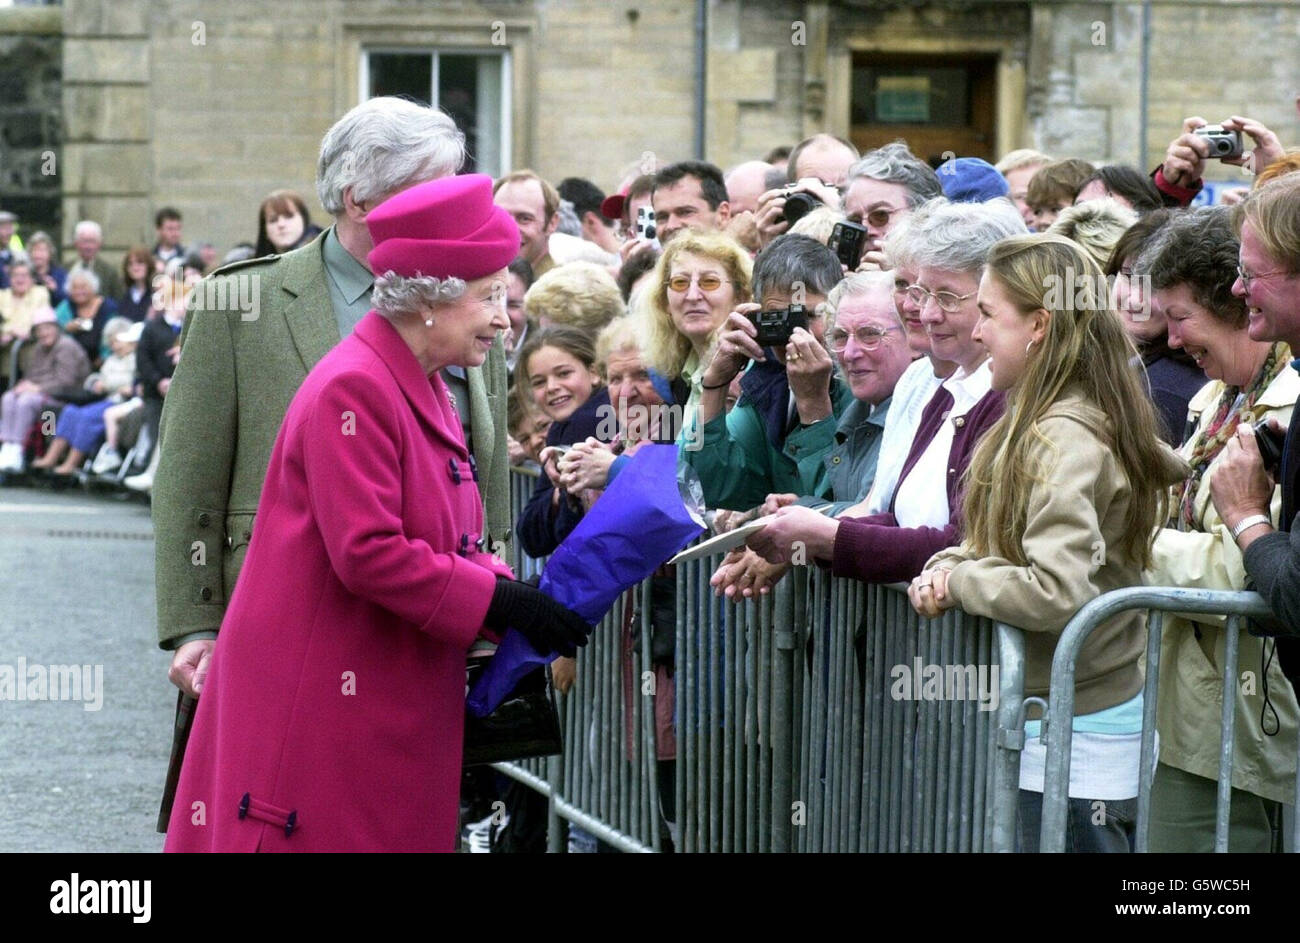 Britain's Queen Elizabeth II touring the square in Portree on the Isle of Skye in Scotland, as part of the continuing Golden Jubilee tour of the United Kingdom. Later, she was travelling to Stornoway and Wick. Stock Photo